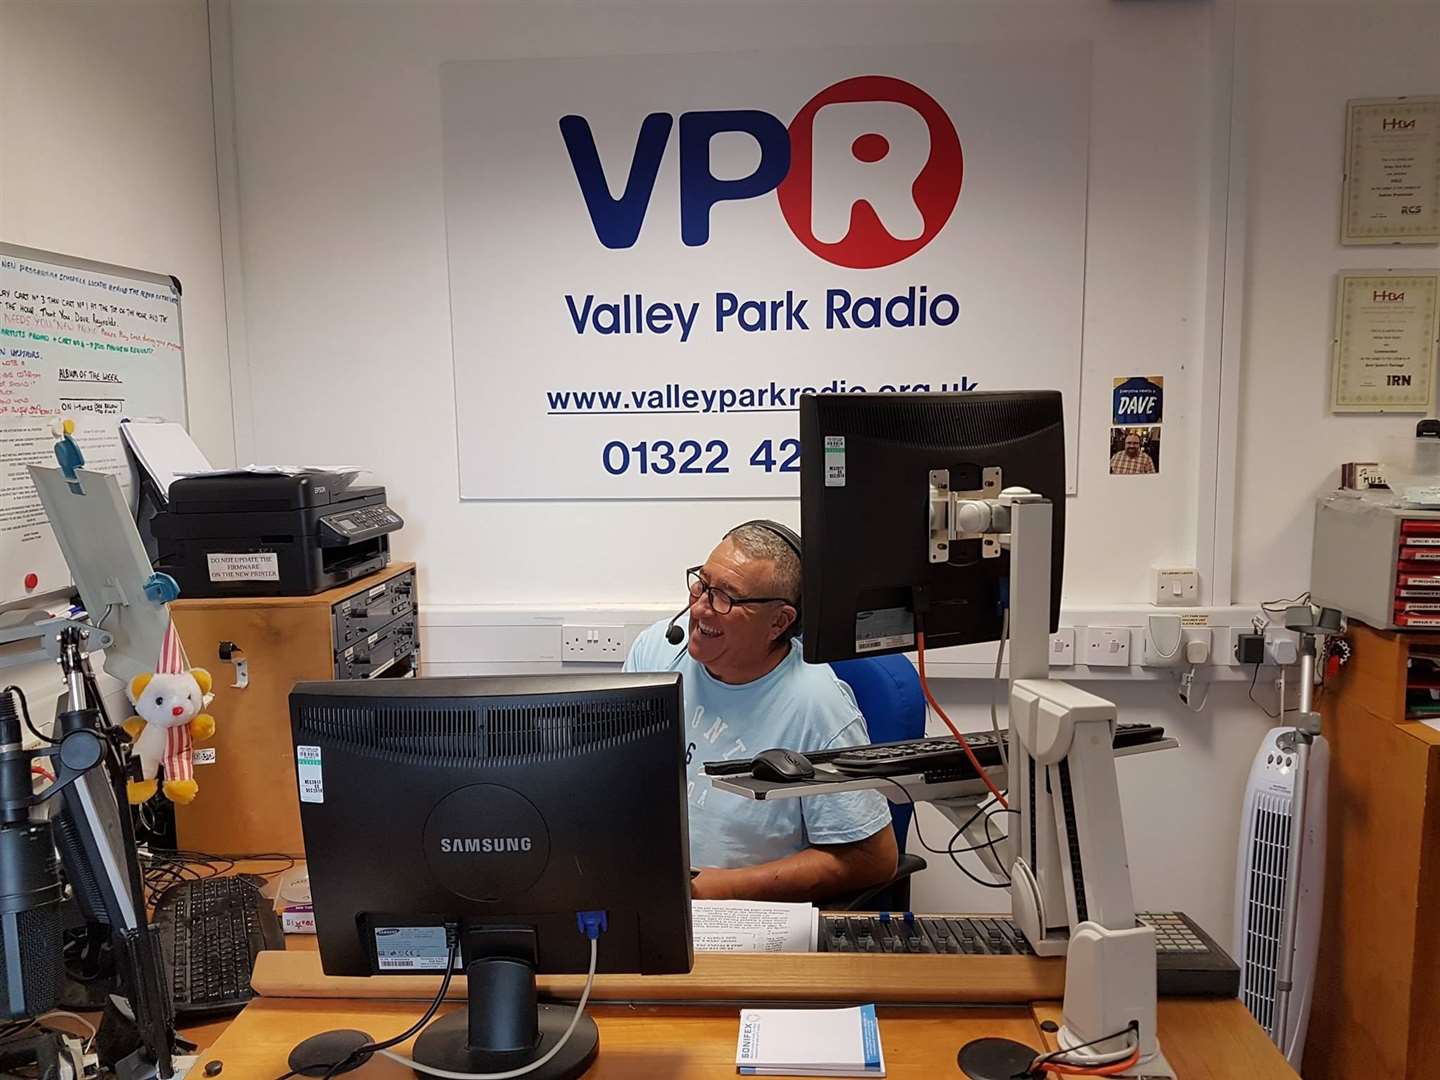 Clive Jenns has been a DJ at VPR for two years. Picture: VPR Facebook